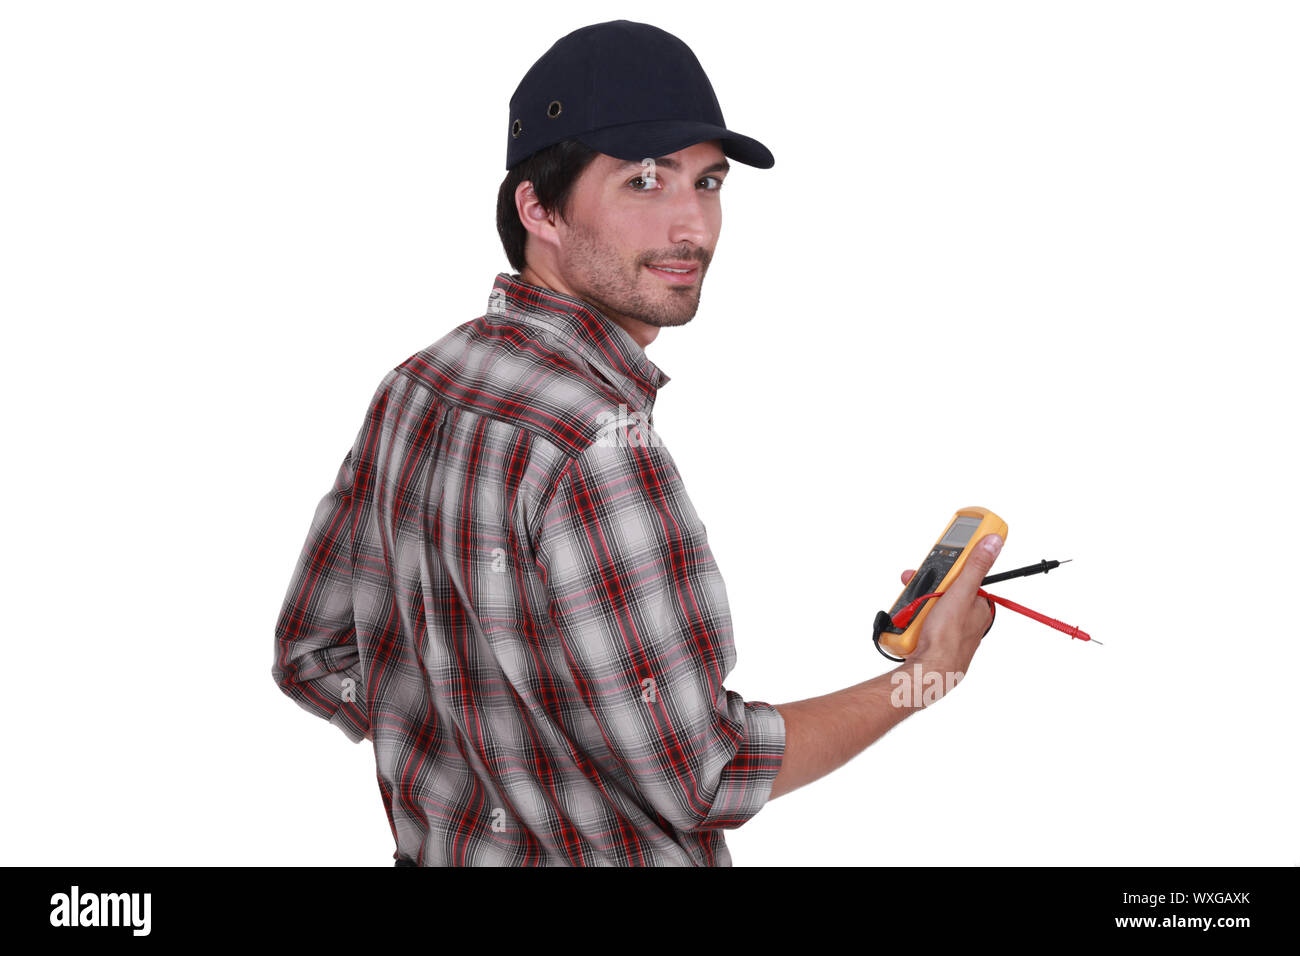 Electrician making safety checks Stock Photo